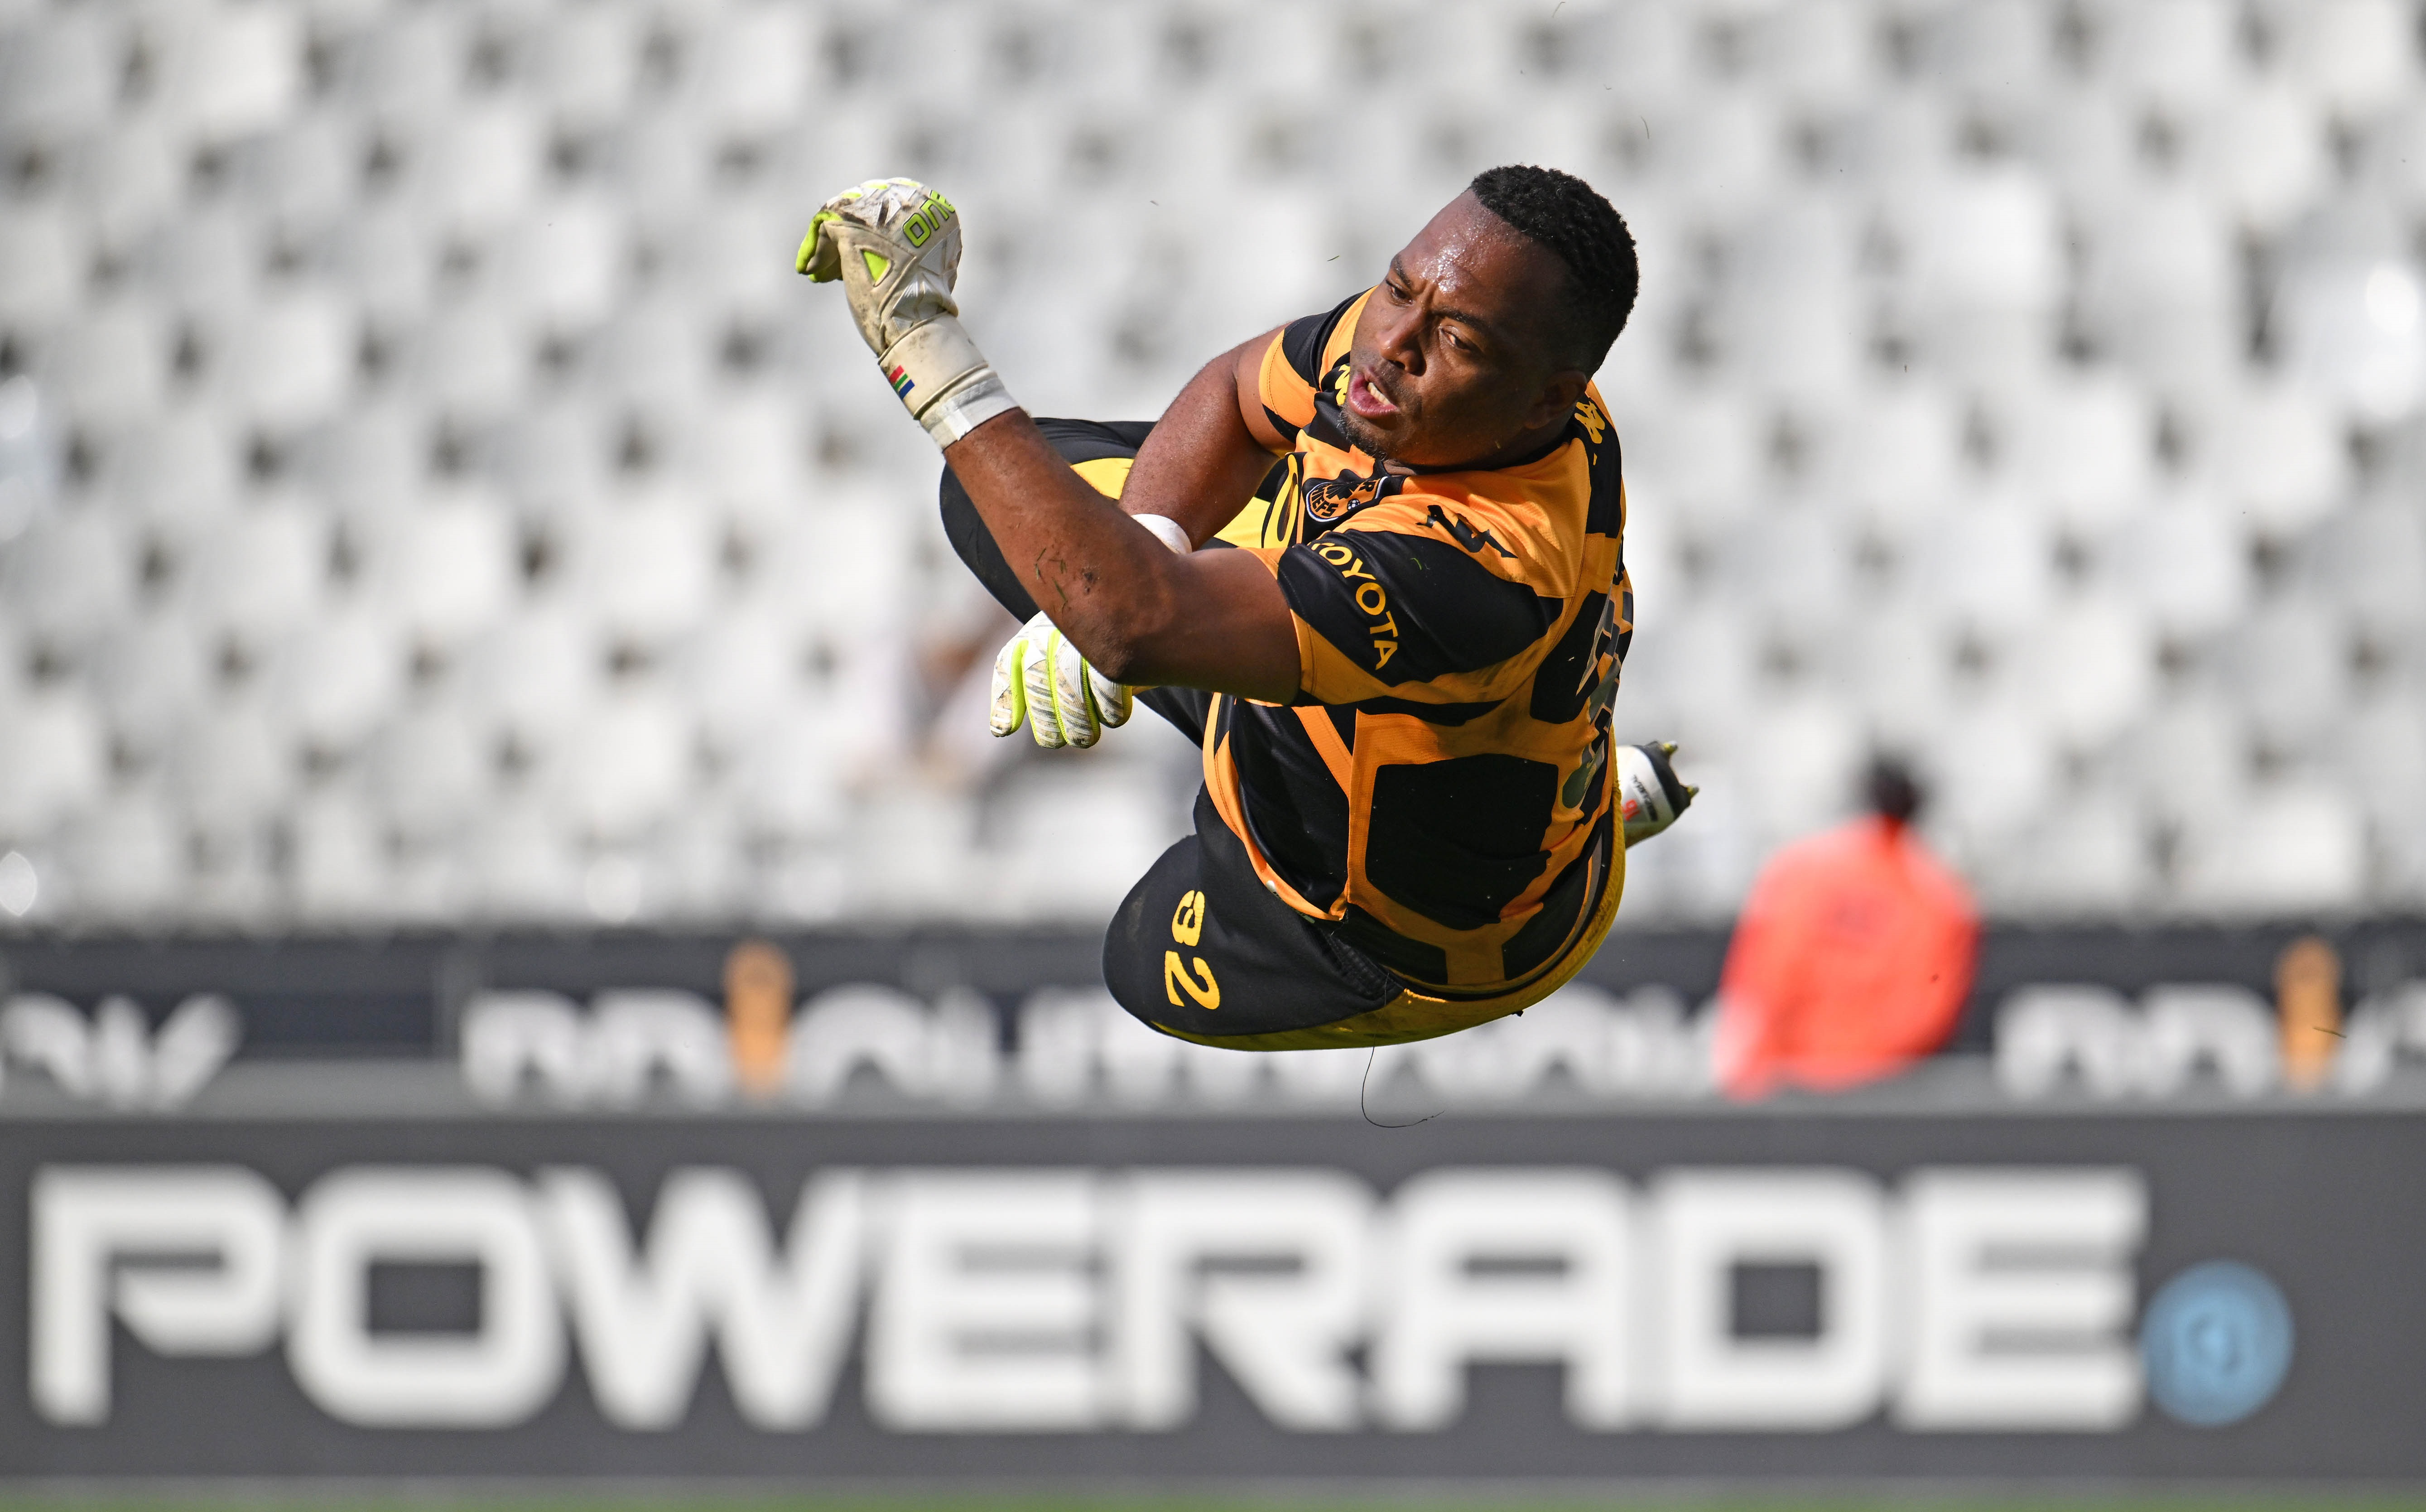 Khune’s Hand Forced Into Retirement?